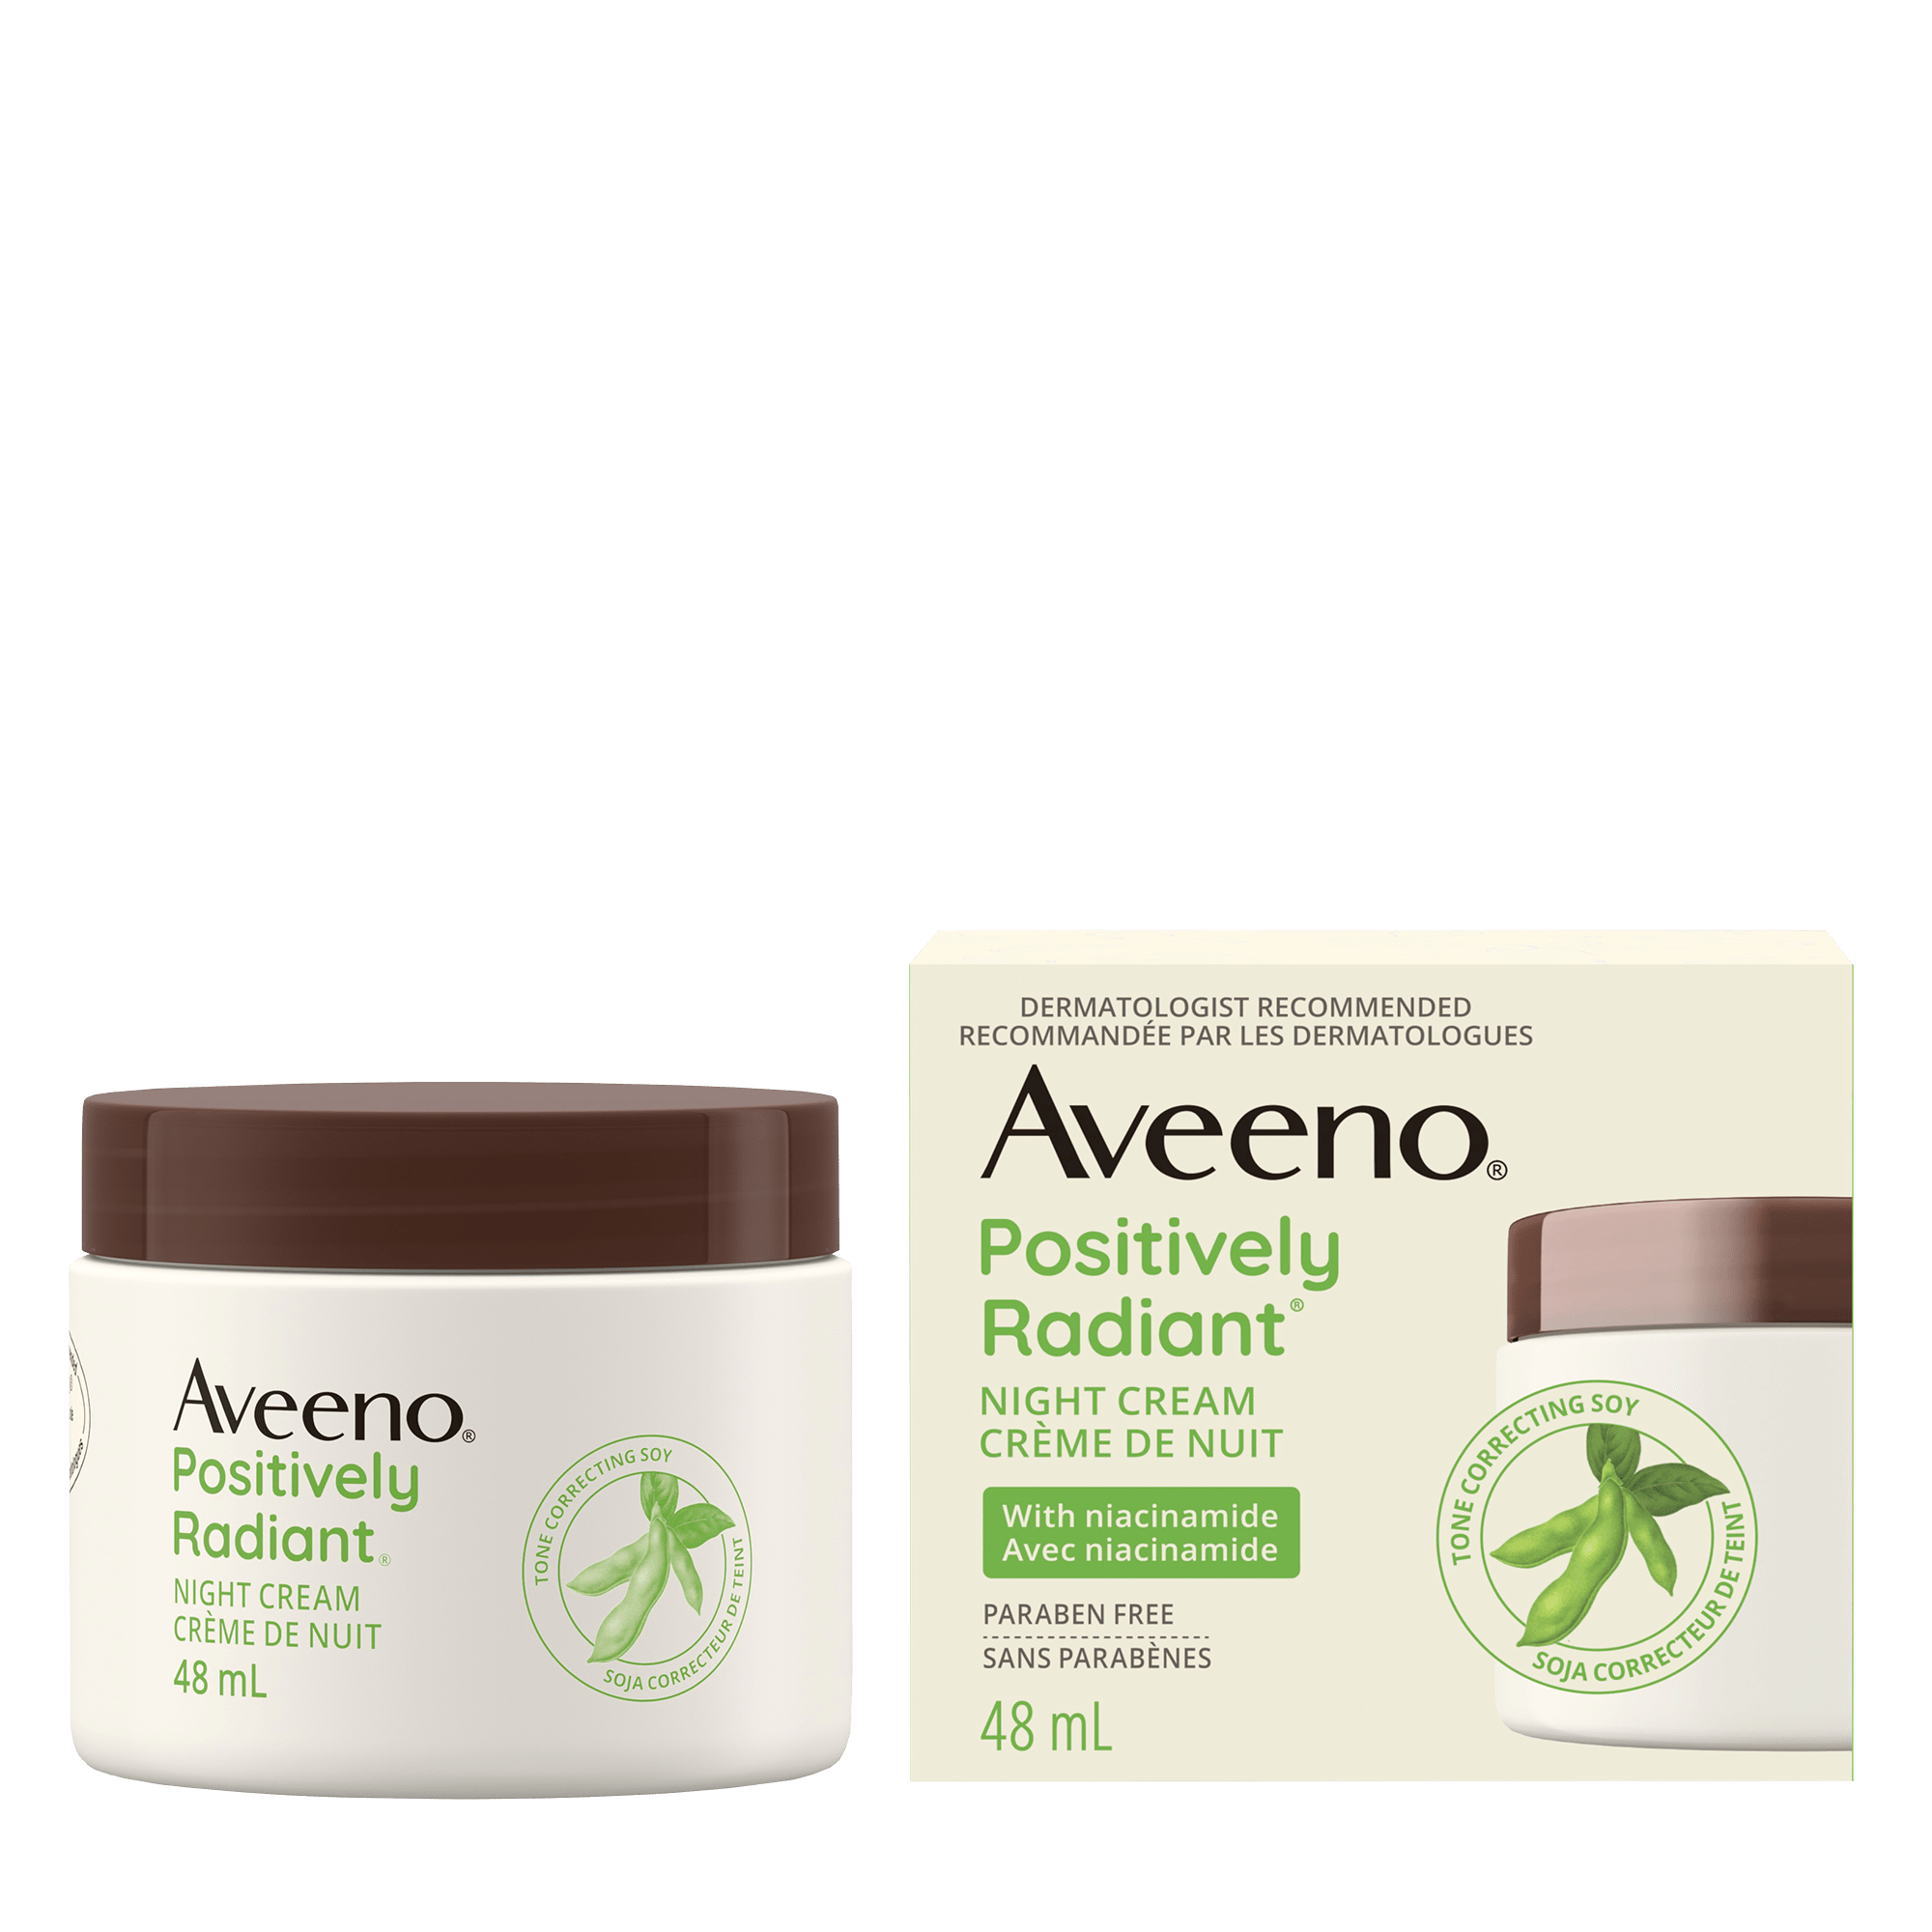 AVEENO® POSITIVELY RADIANT® Night Cream, Jar 48mL with its package next to it